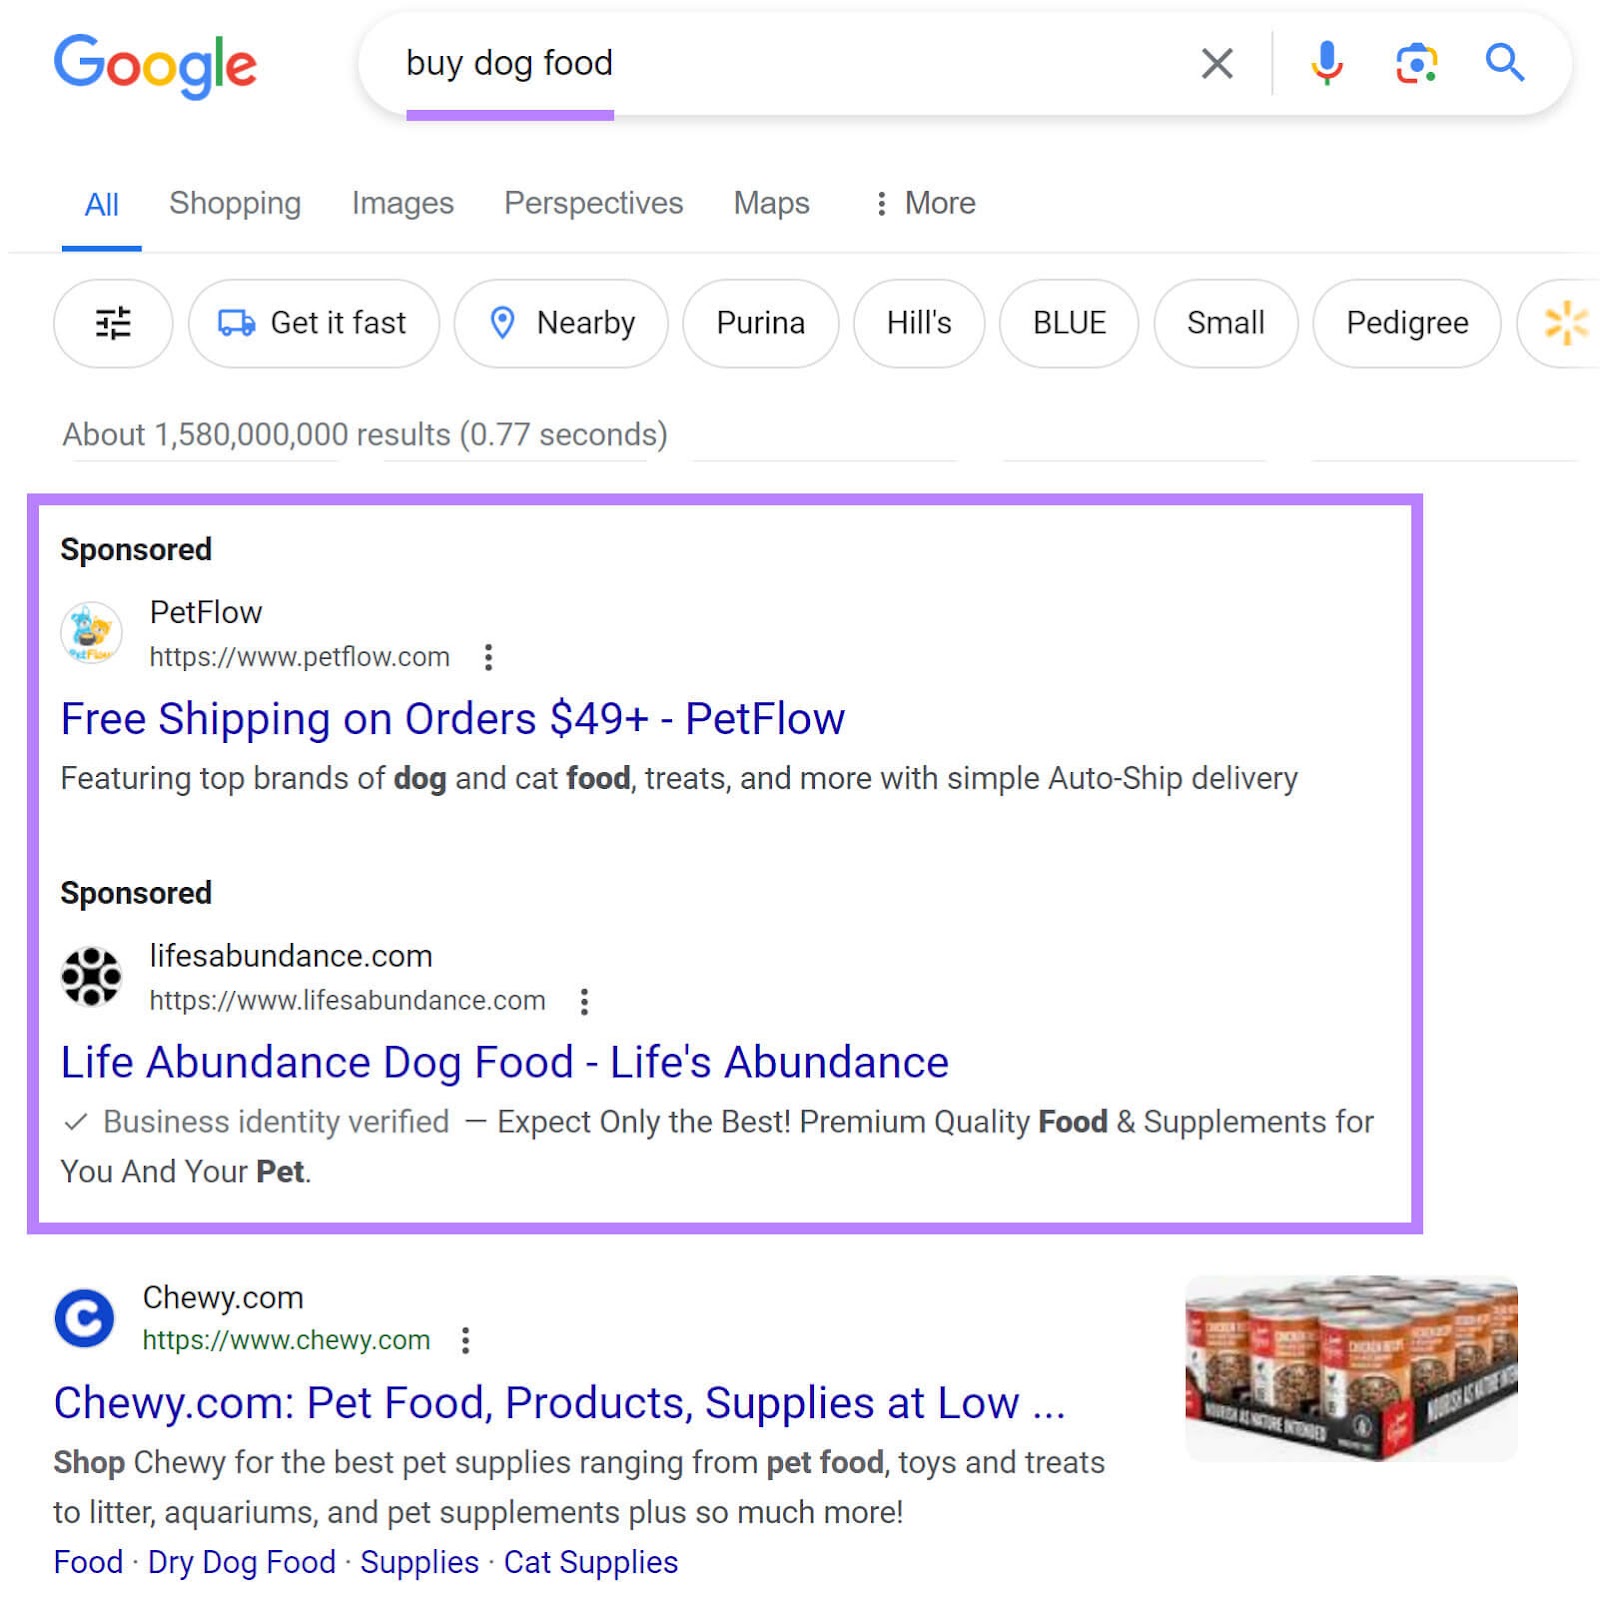 Search ads appearing on Google for "buy dog food" query appearing above the organic search results